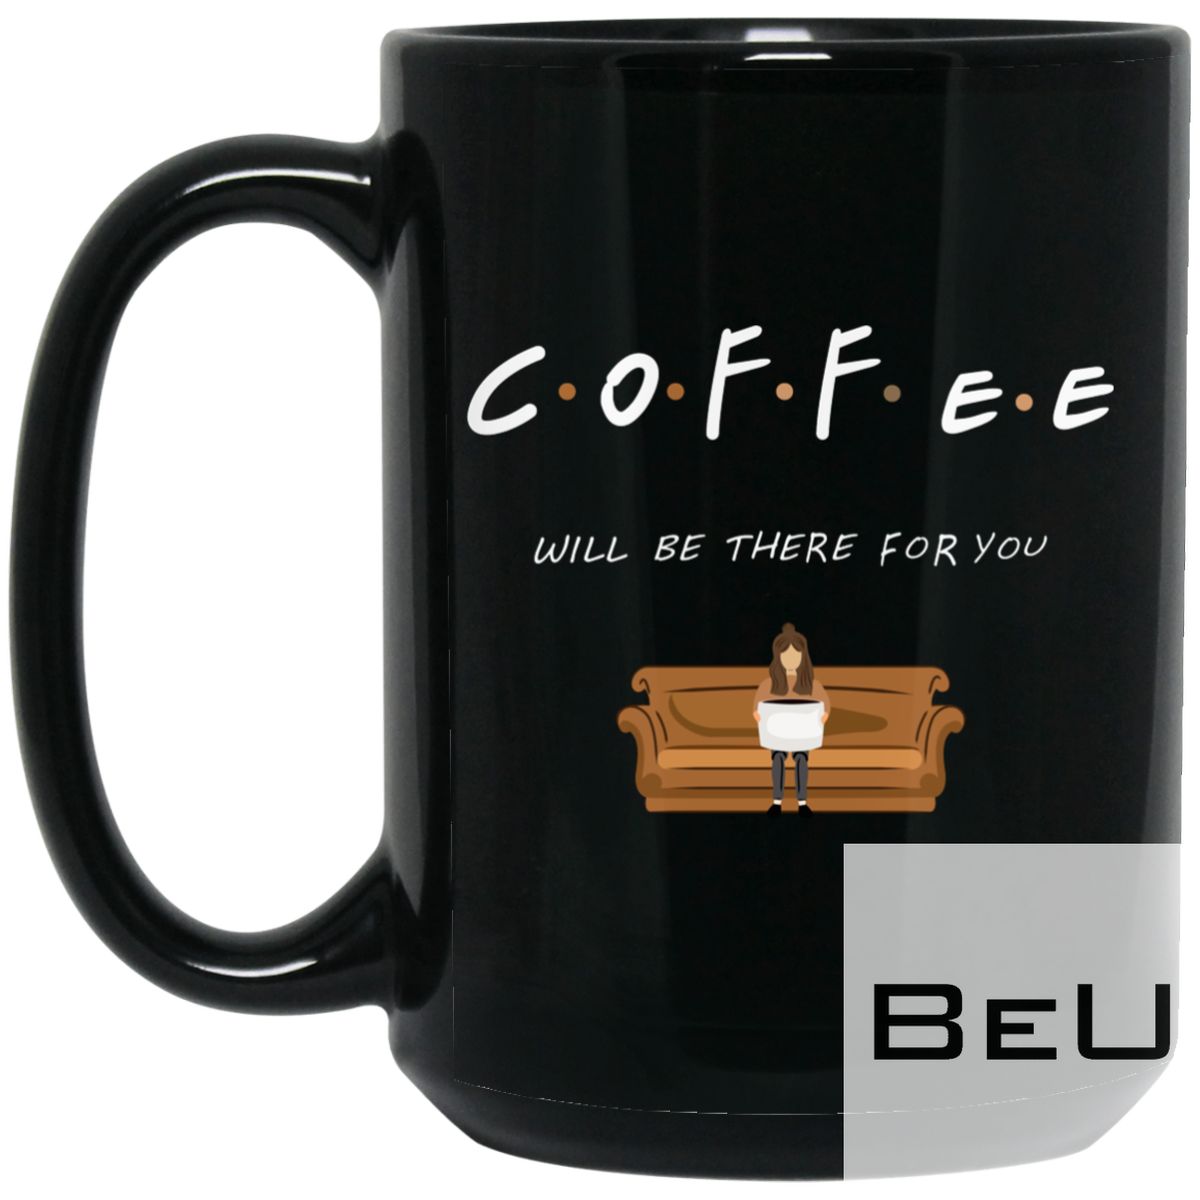 Coffee Friends Will Be There For You Mug